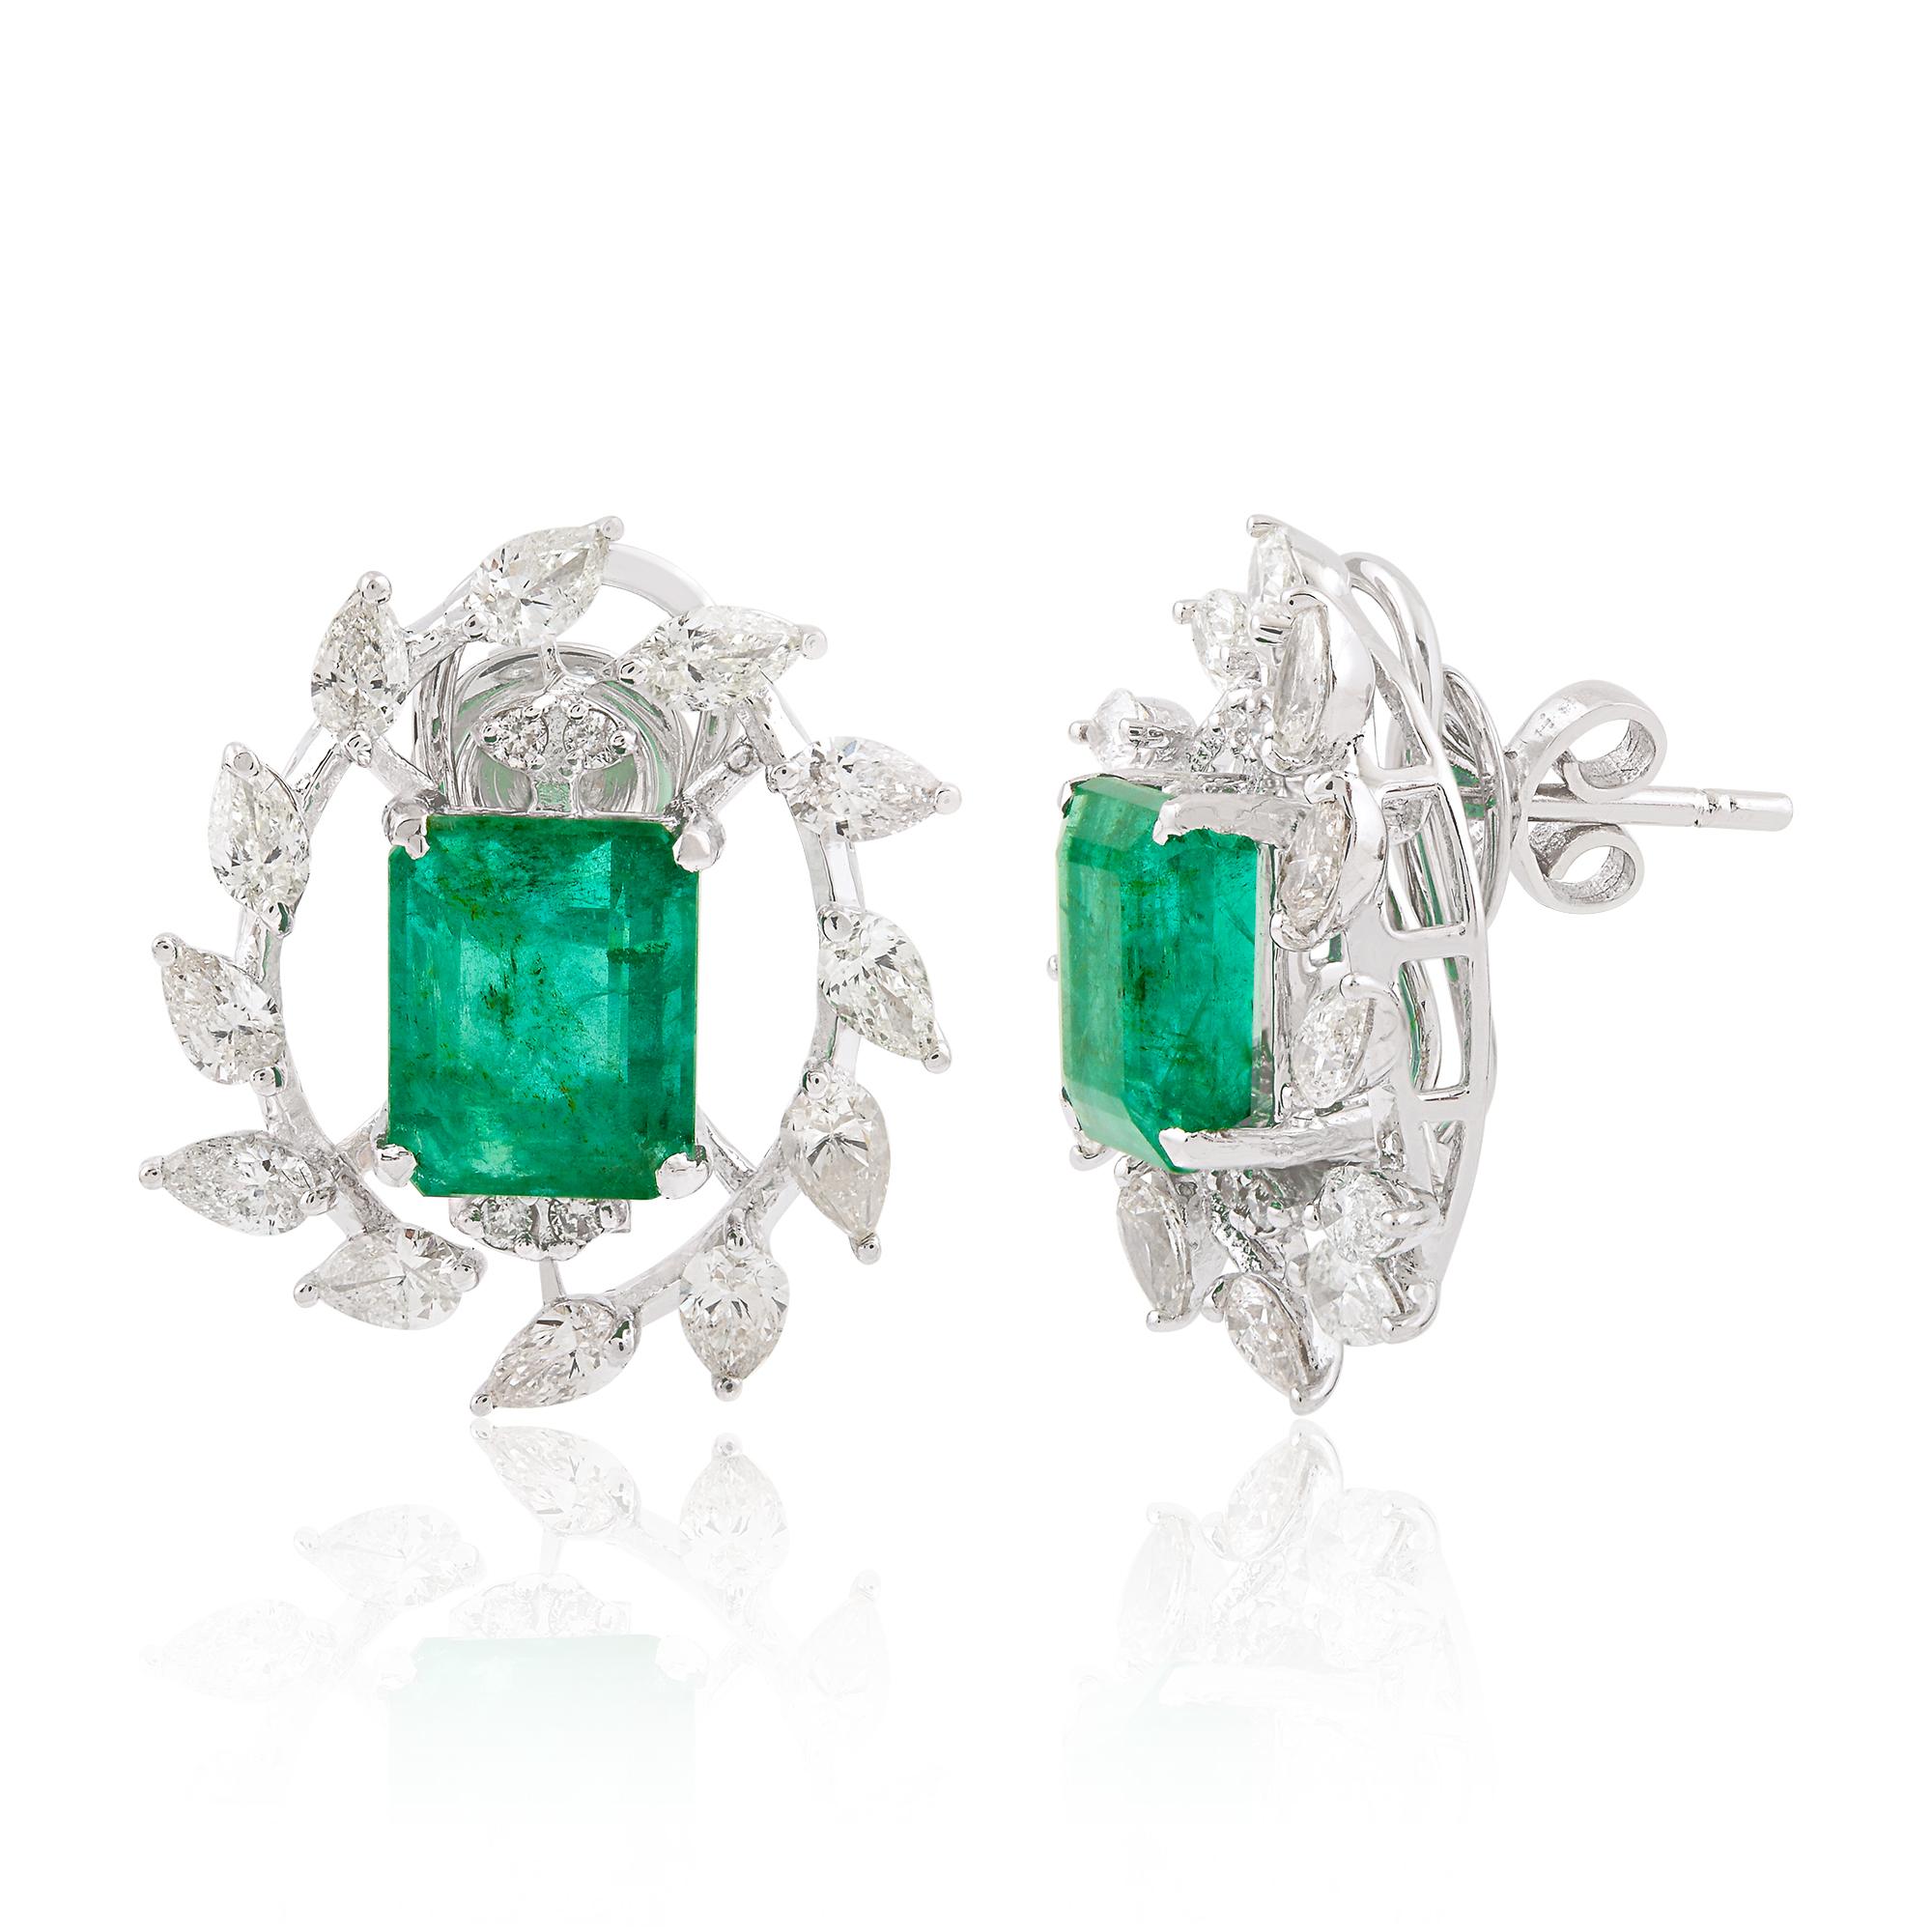 Item Code :- CN-16764
Gross Wt. :- 9.66 gm
18k Solid White Gold Wt. :- 7.99 gm
Natural Diamond Wt. :- 2.80 Ct. ( AVERAGE DIAMOND CLARITY SI1-SI2 & COLOR H-I )
Emerald Wt. :- 5.56 Ct. 
Earrings Size :- 22 mm approx.

✦ Sizing
.....................
We